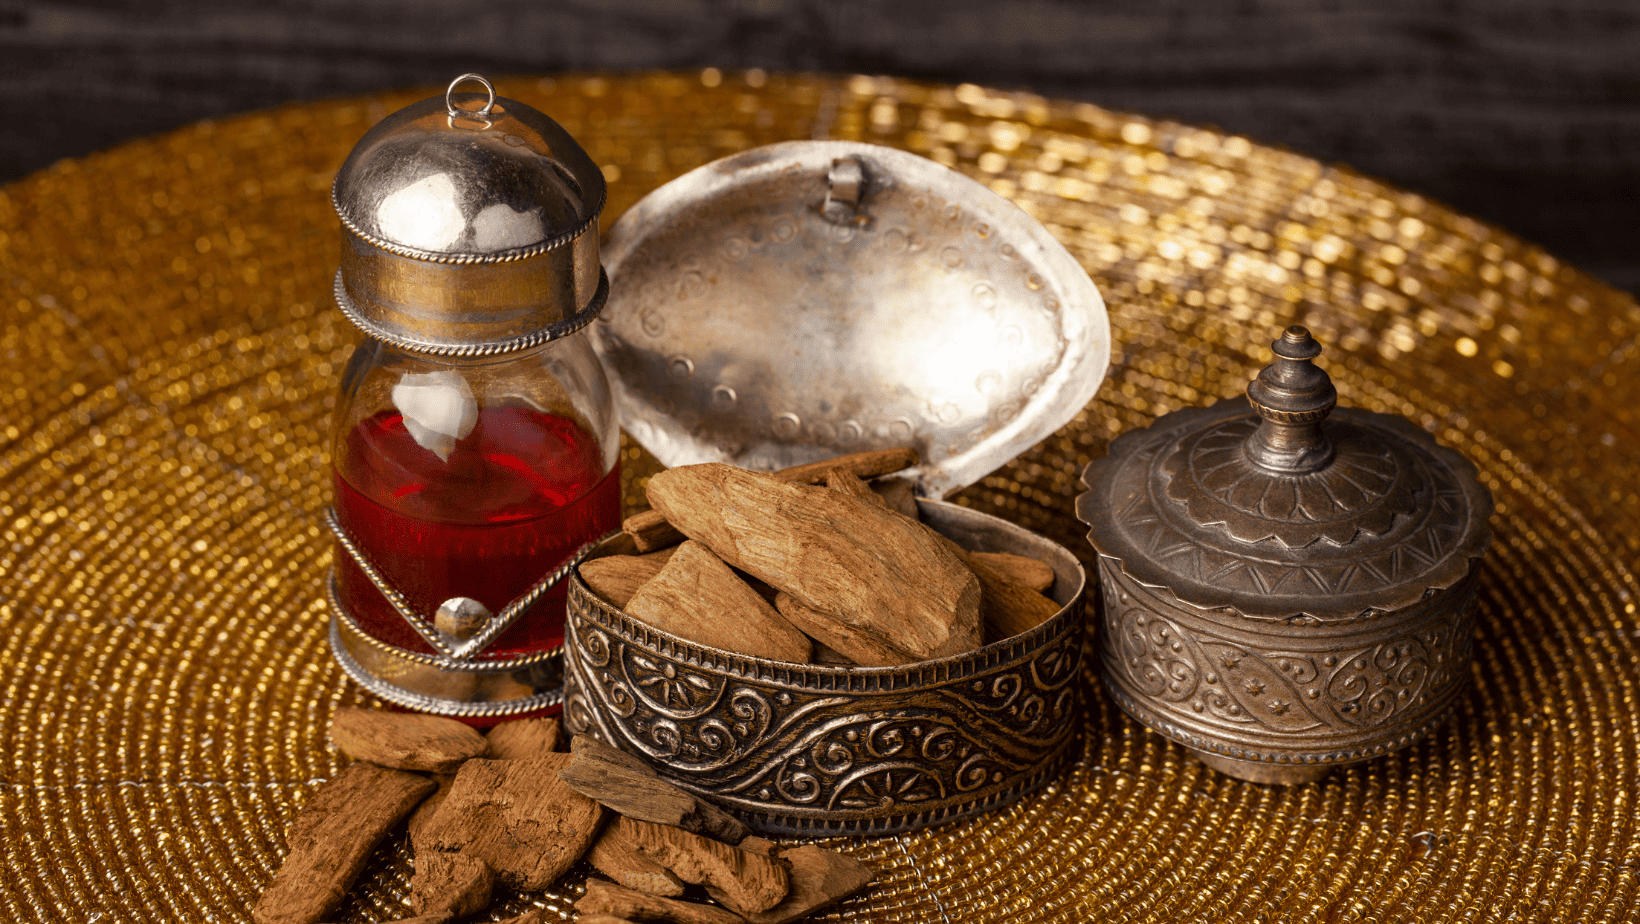 Bakhoor – The Traditional Incense of the Middle East